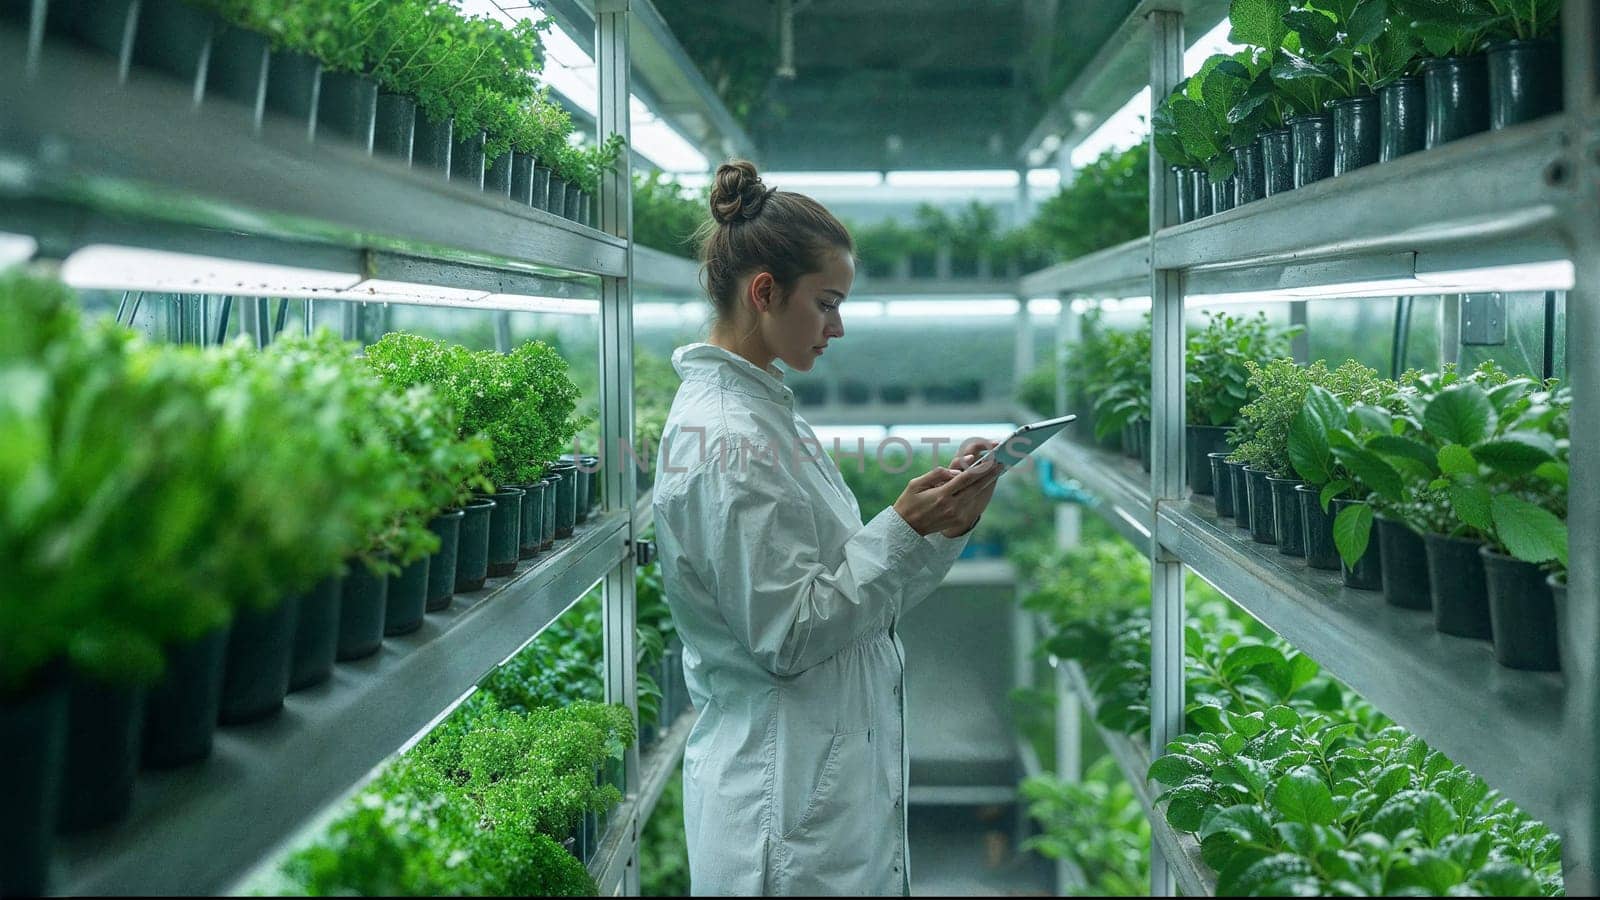 Woman in lab coat uses tablet in high-tech greenhouse to enhance plant growth.